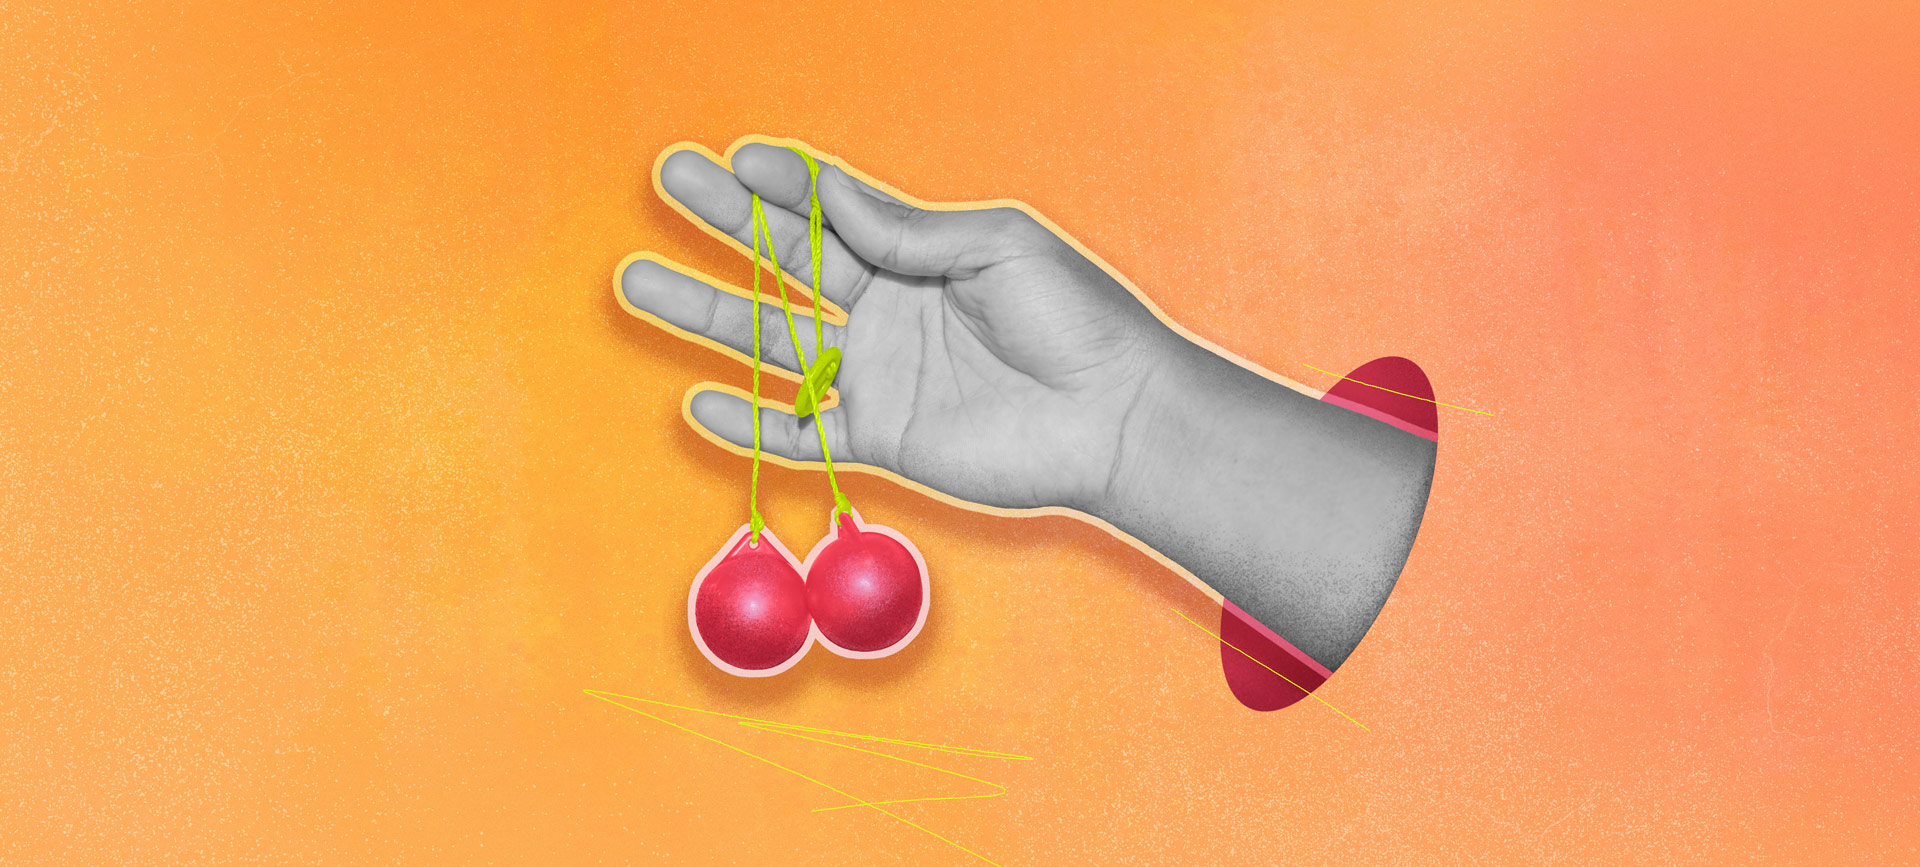 A hand dangles two cherries on a stem as it comes out of a hole in an orange background.